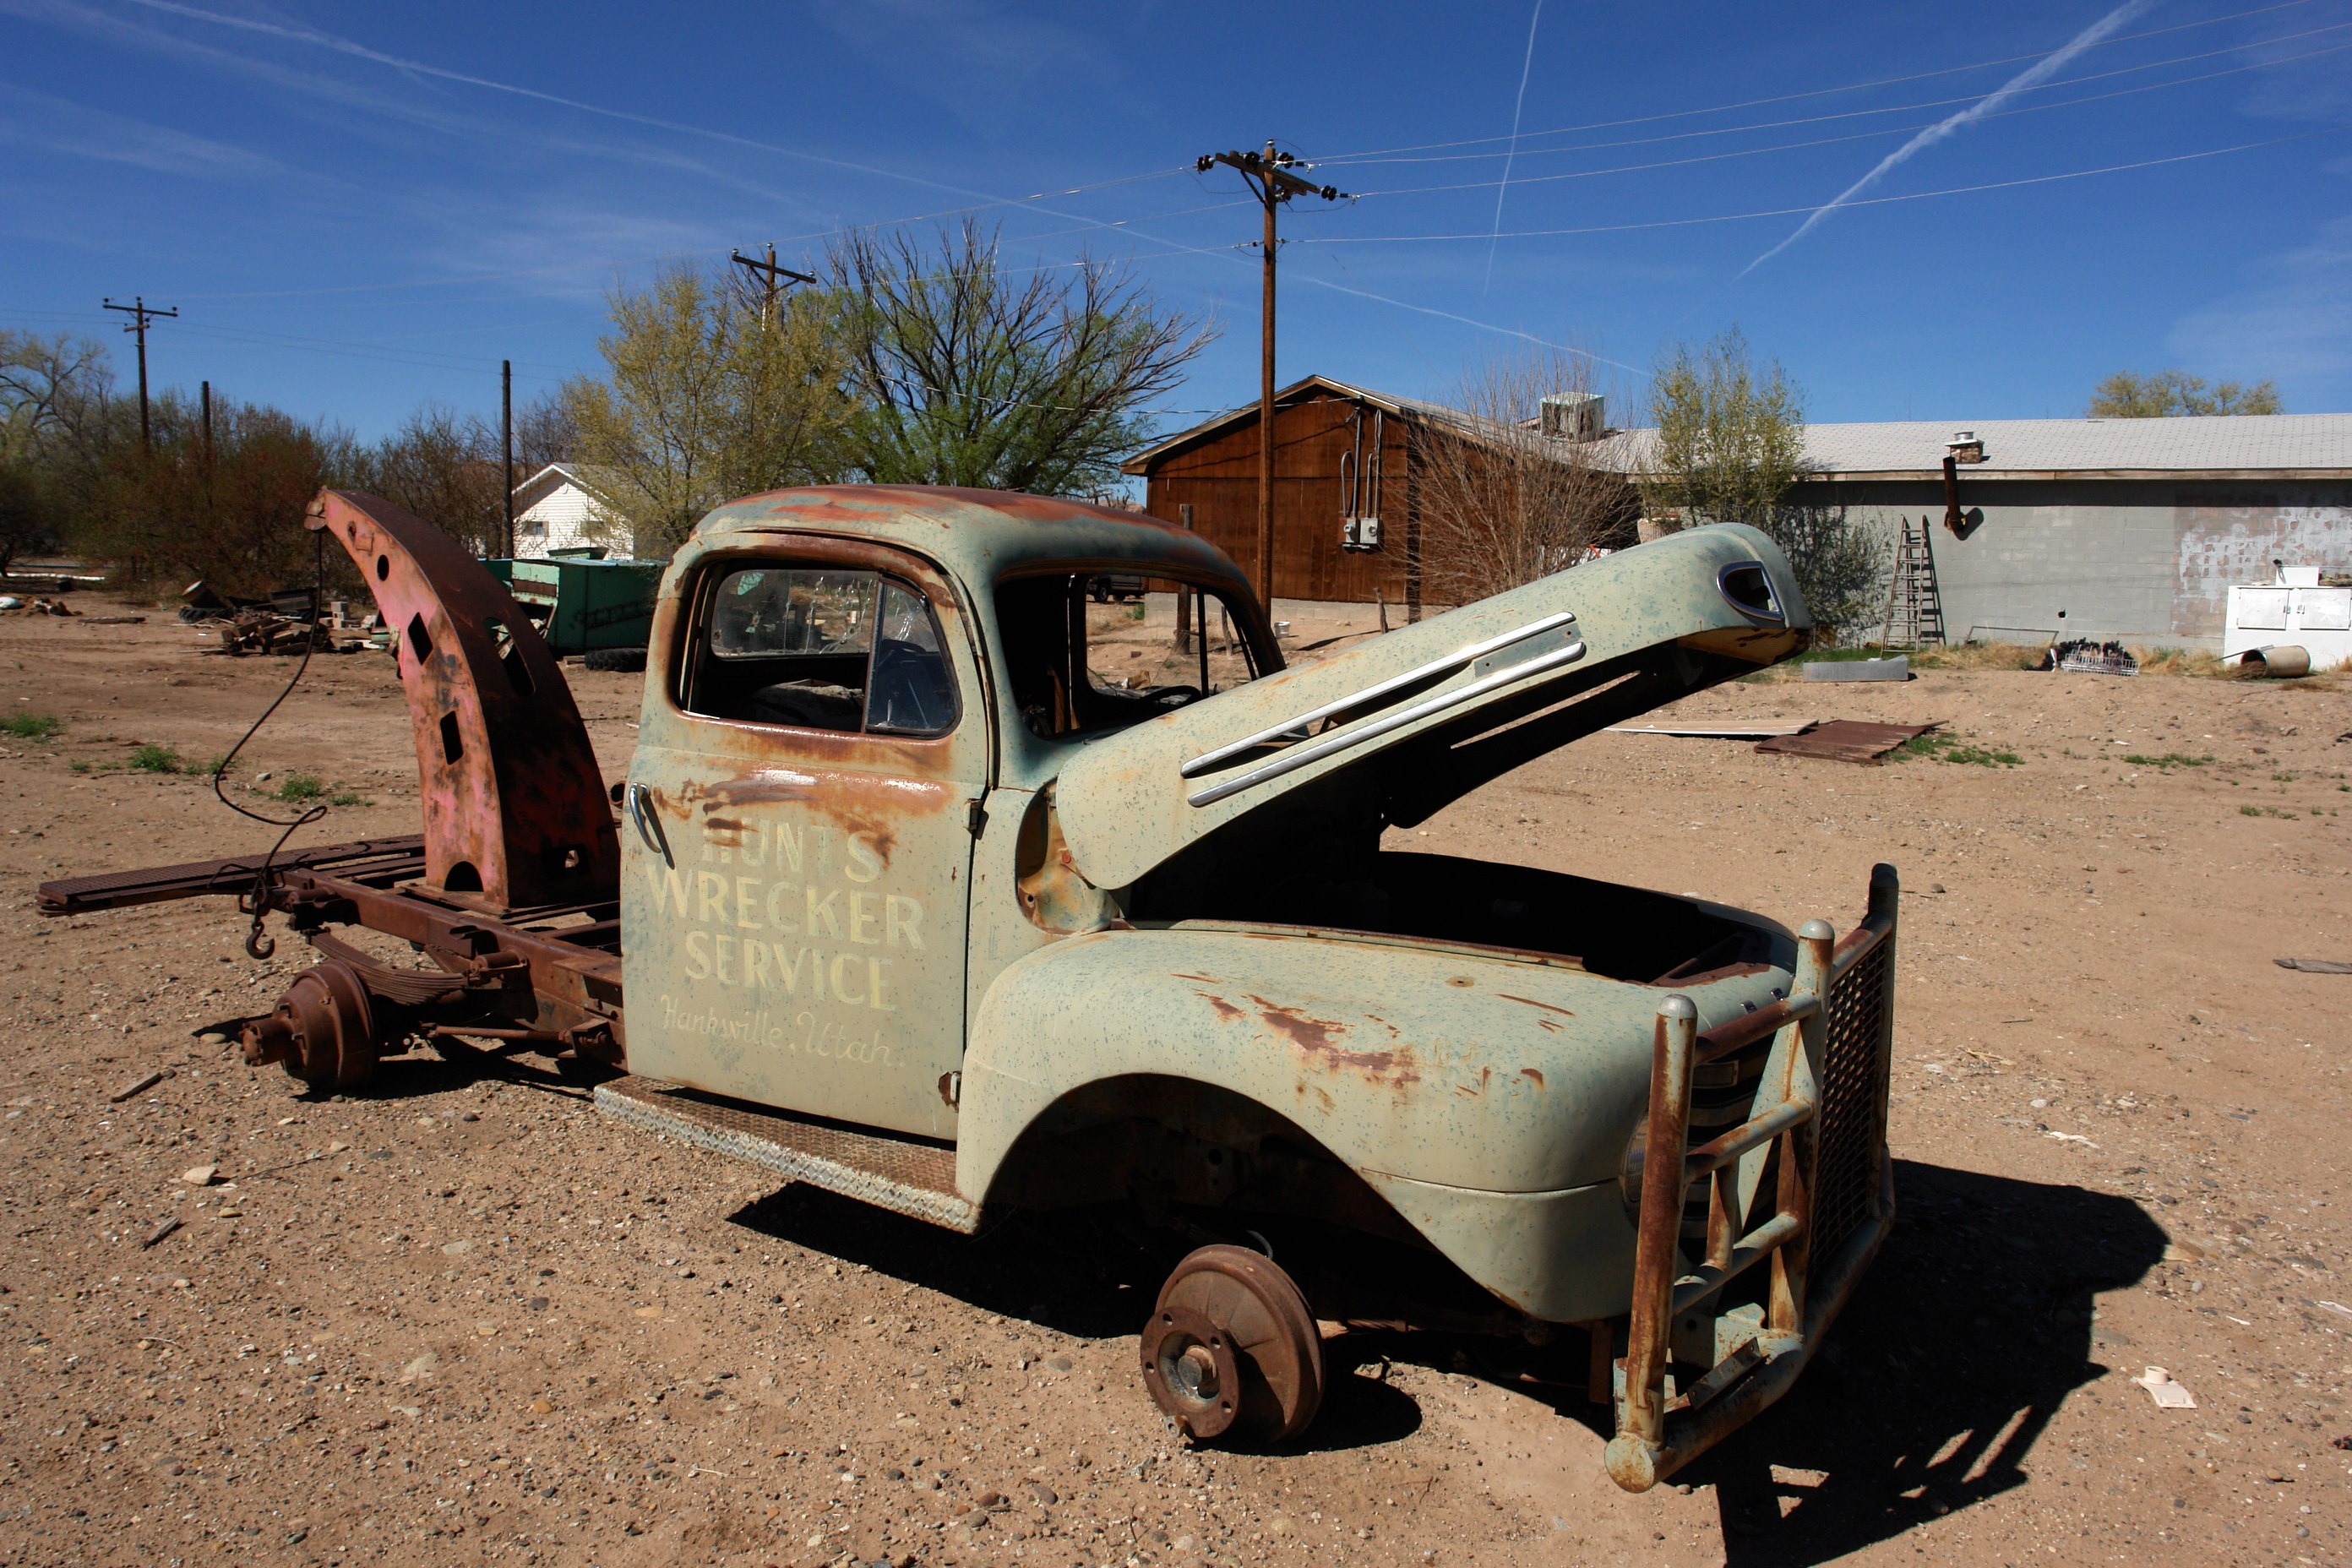 File:Abandoned Old Rusty Car (3467150757).jpg - Wikimedia Commons